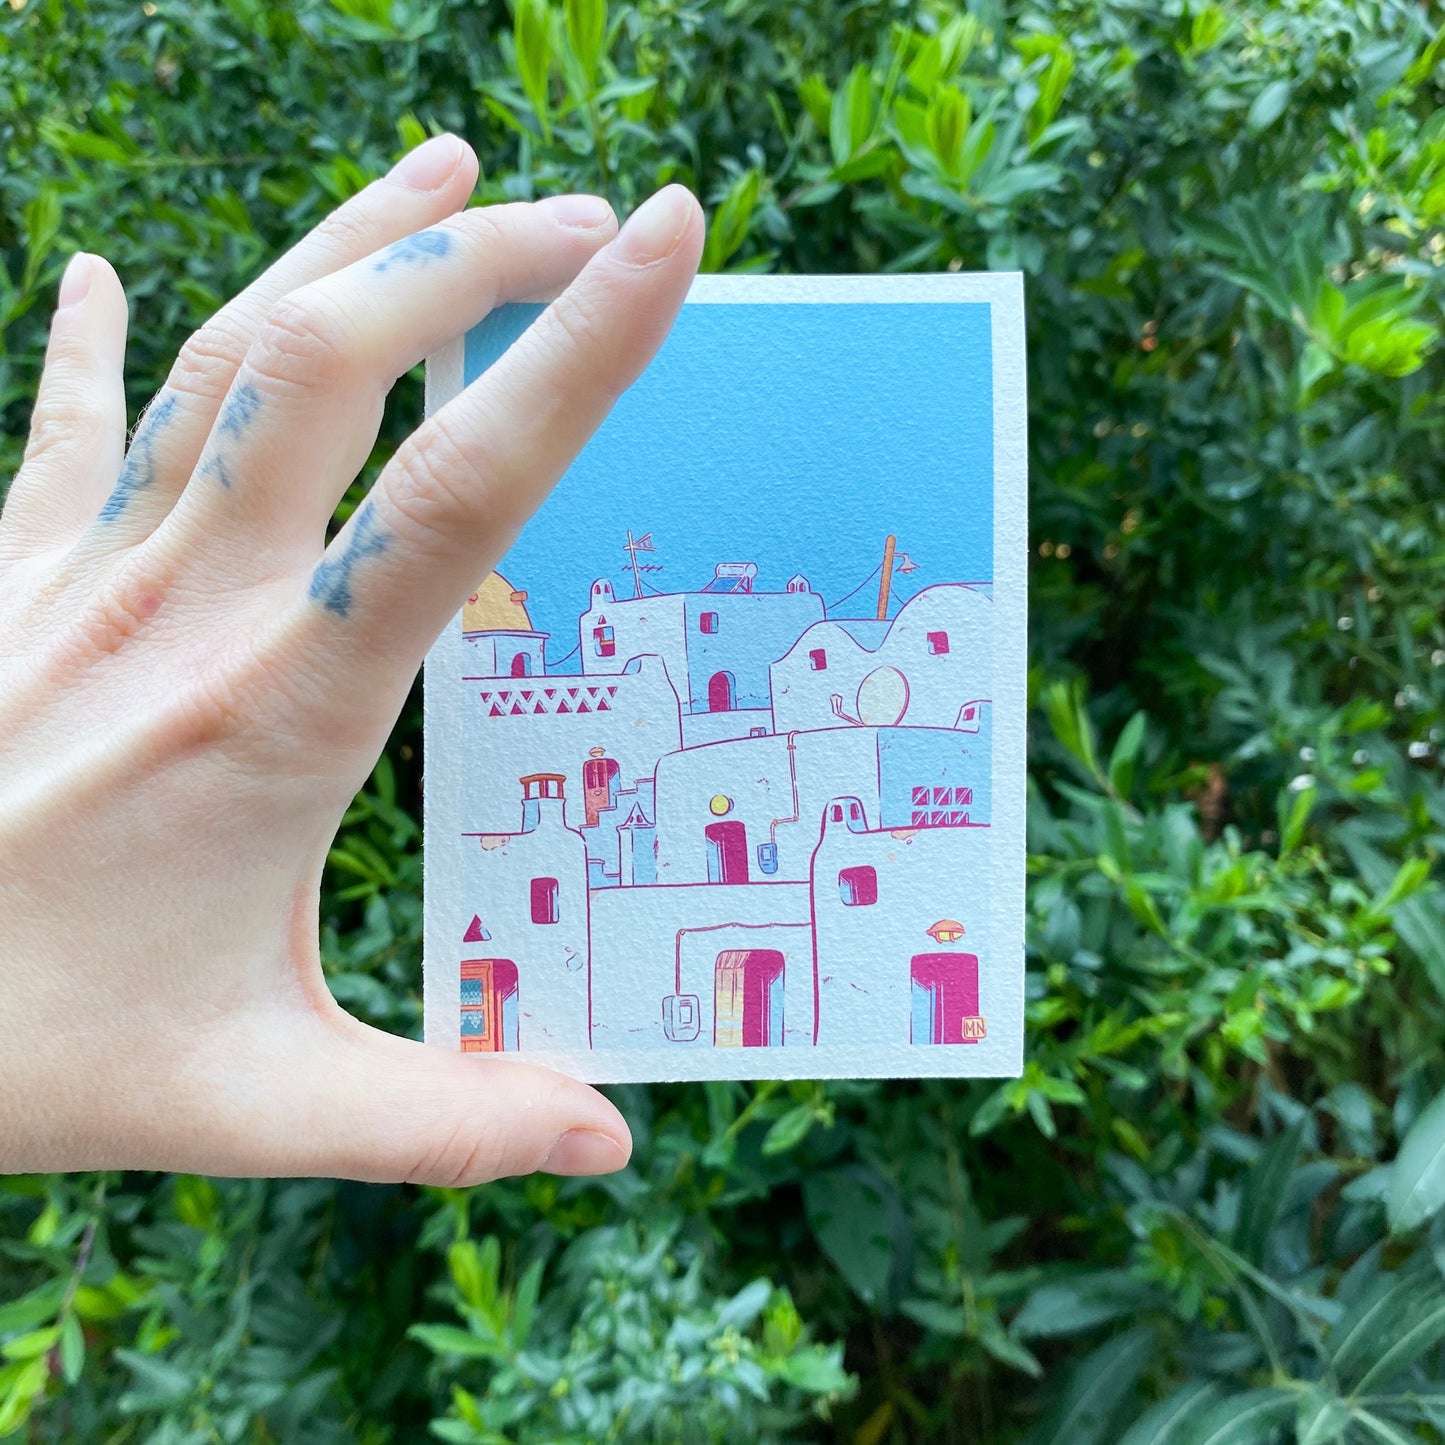 The mini print is hold by a hand in front of some bushes.